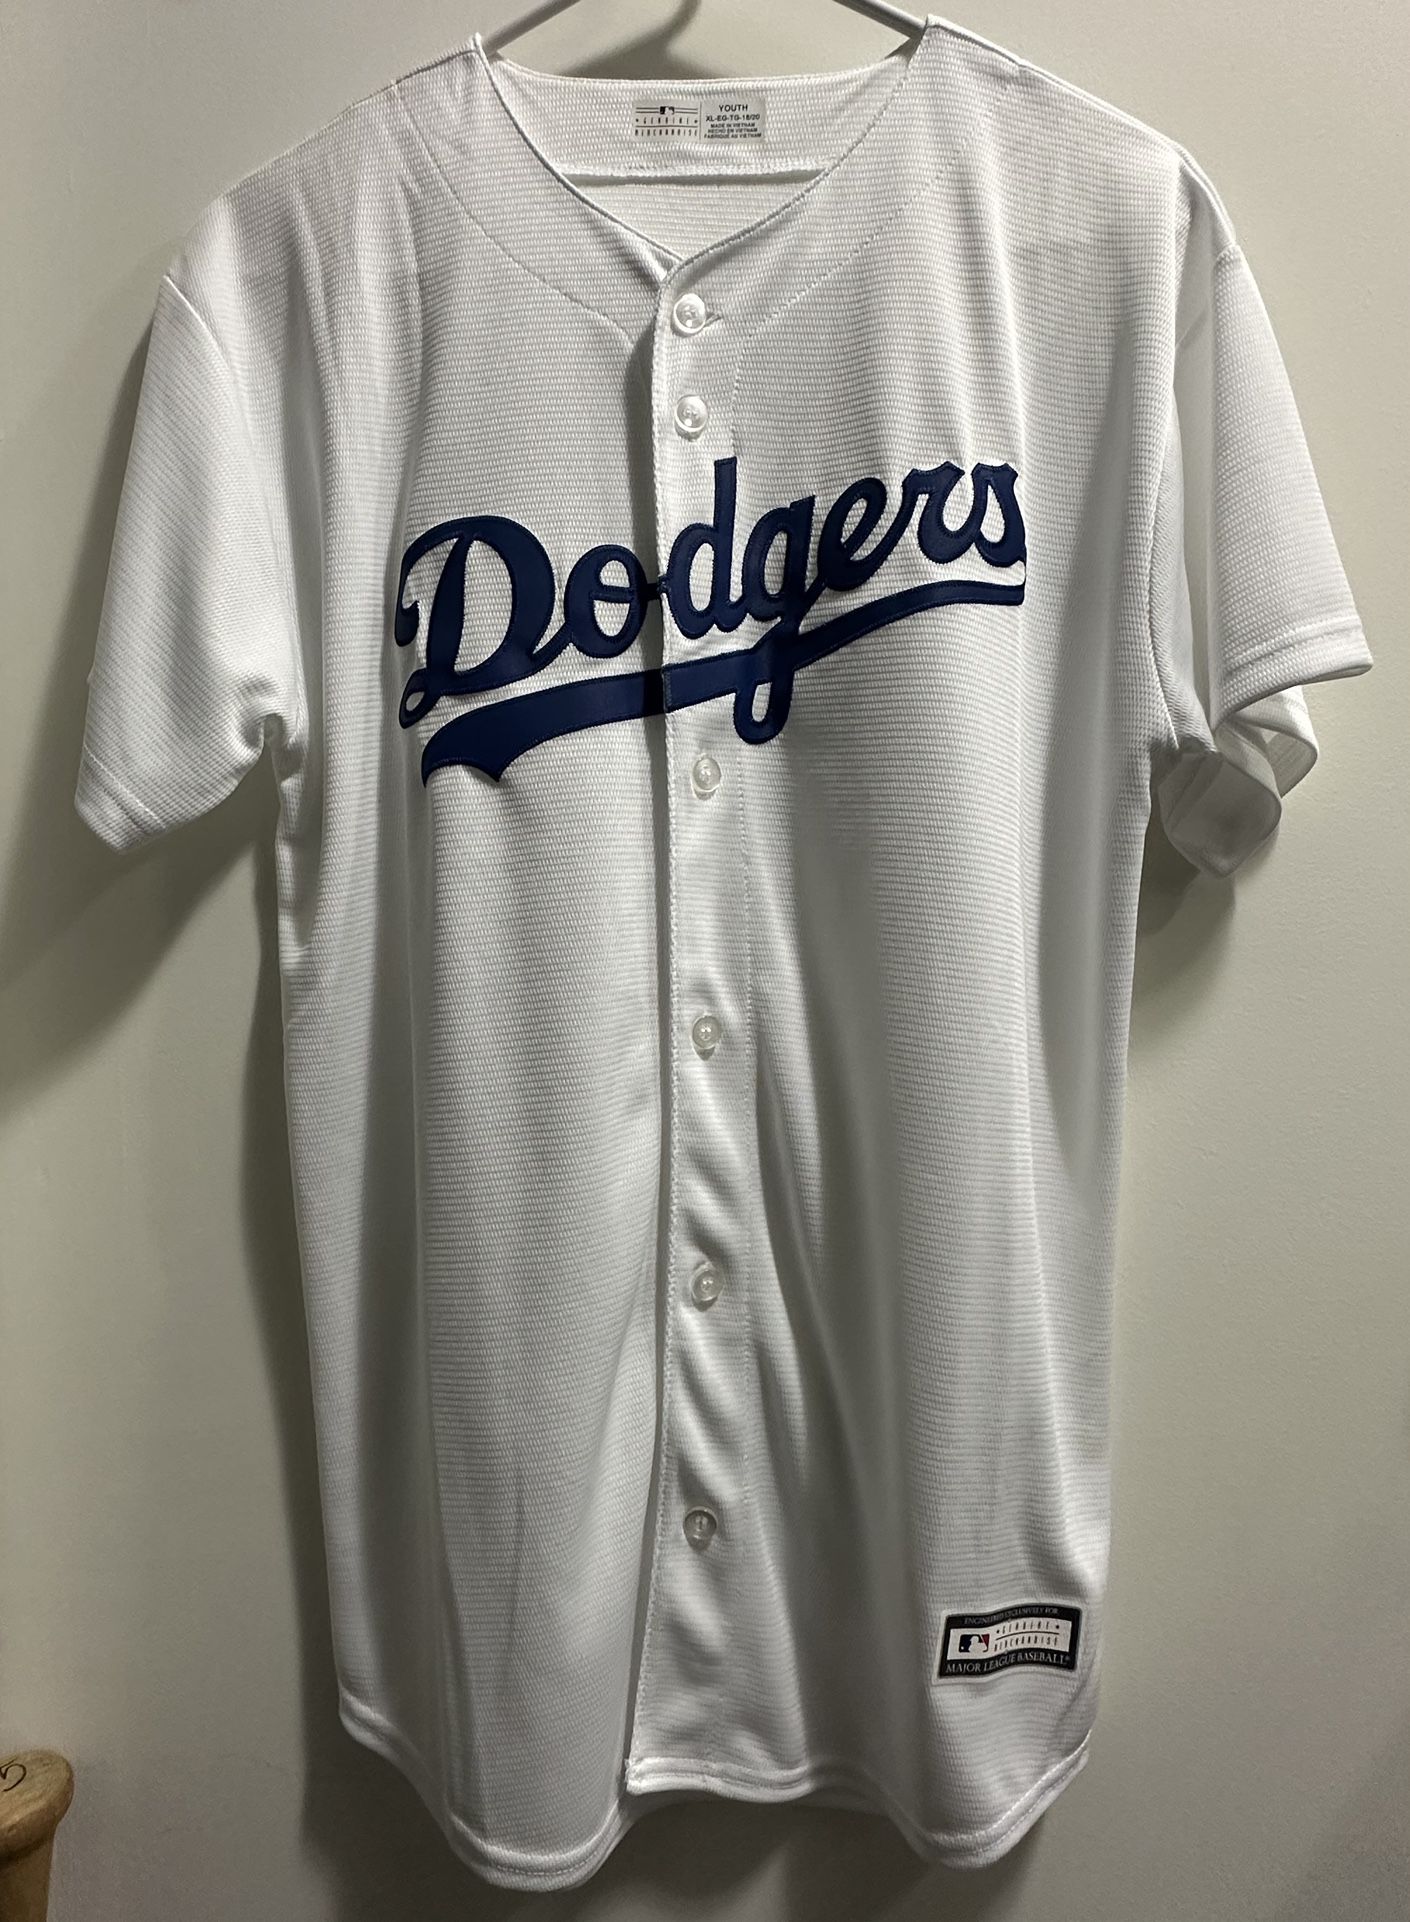 Los Angeles Dodgers Youth XL Jersey for Sale in Simi Valley, CA